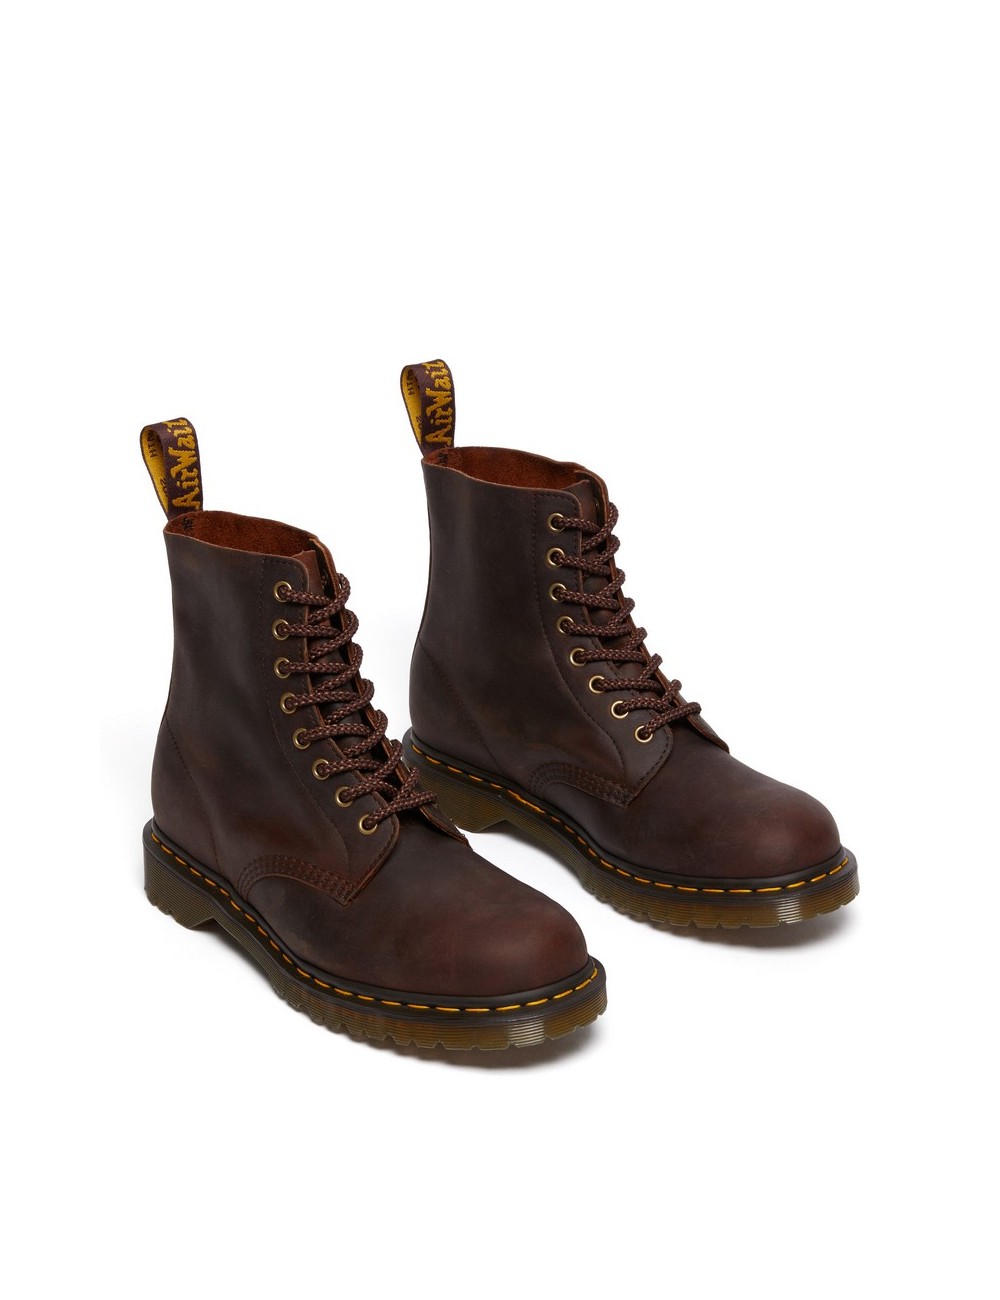 DR MARTENS 1460 PASCAL CHESTNUT BROWN WAXED FULL GRAIN BOOTS